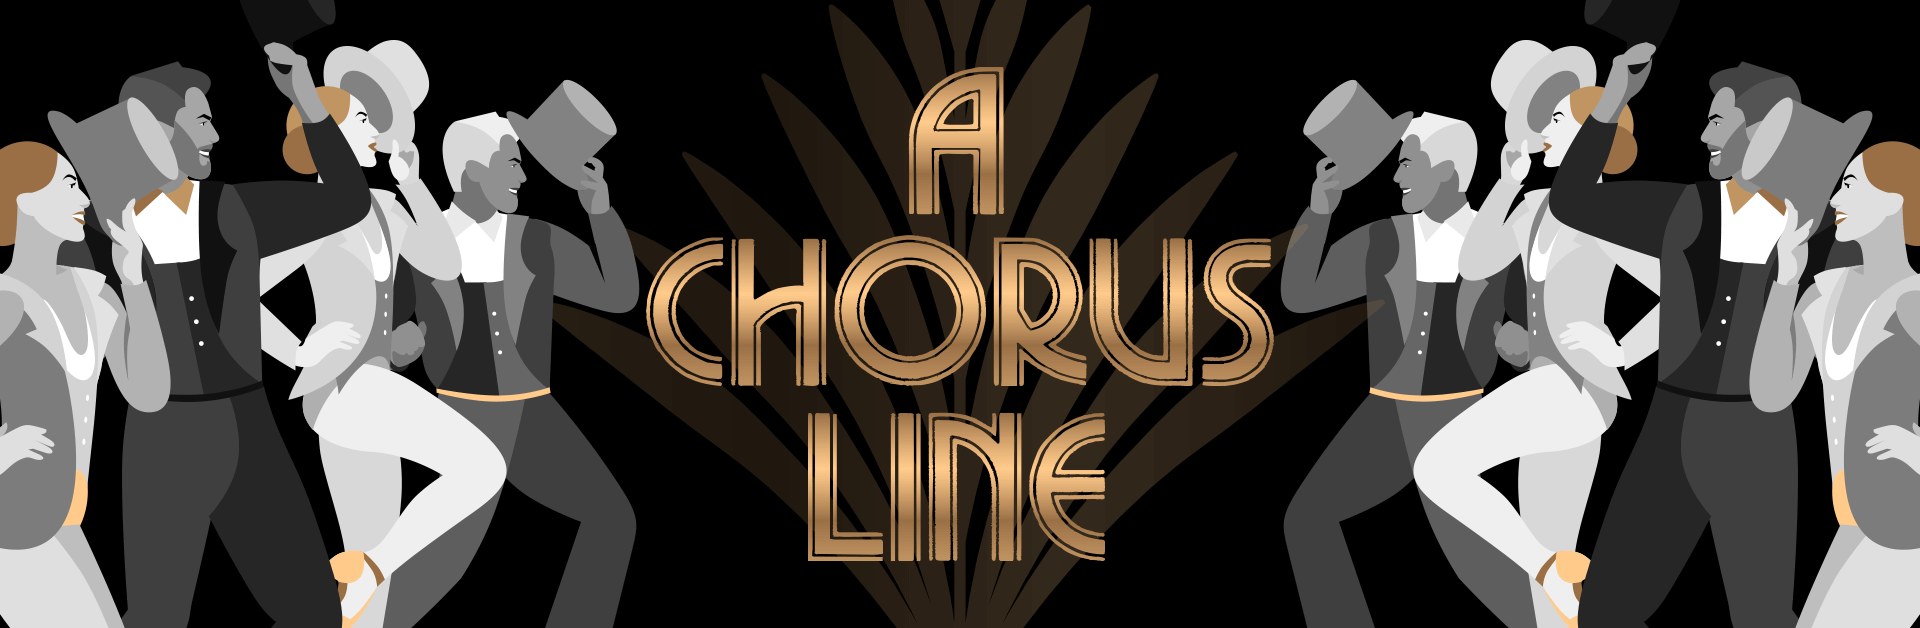 A Chorus Line: A Note from the Artistic Director